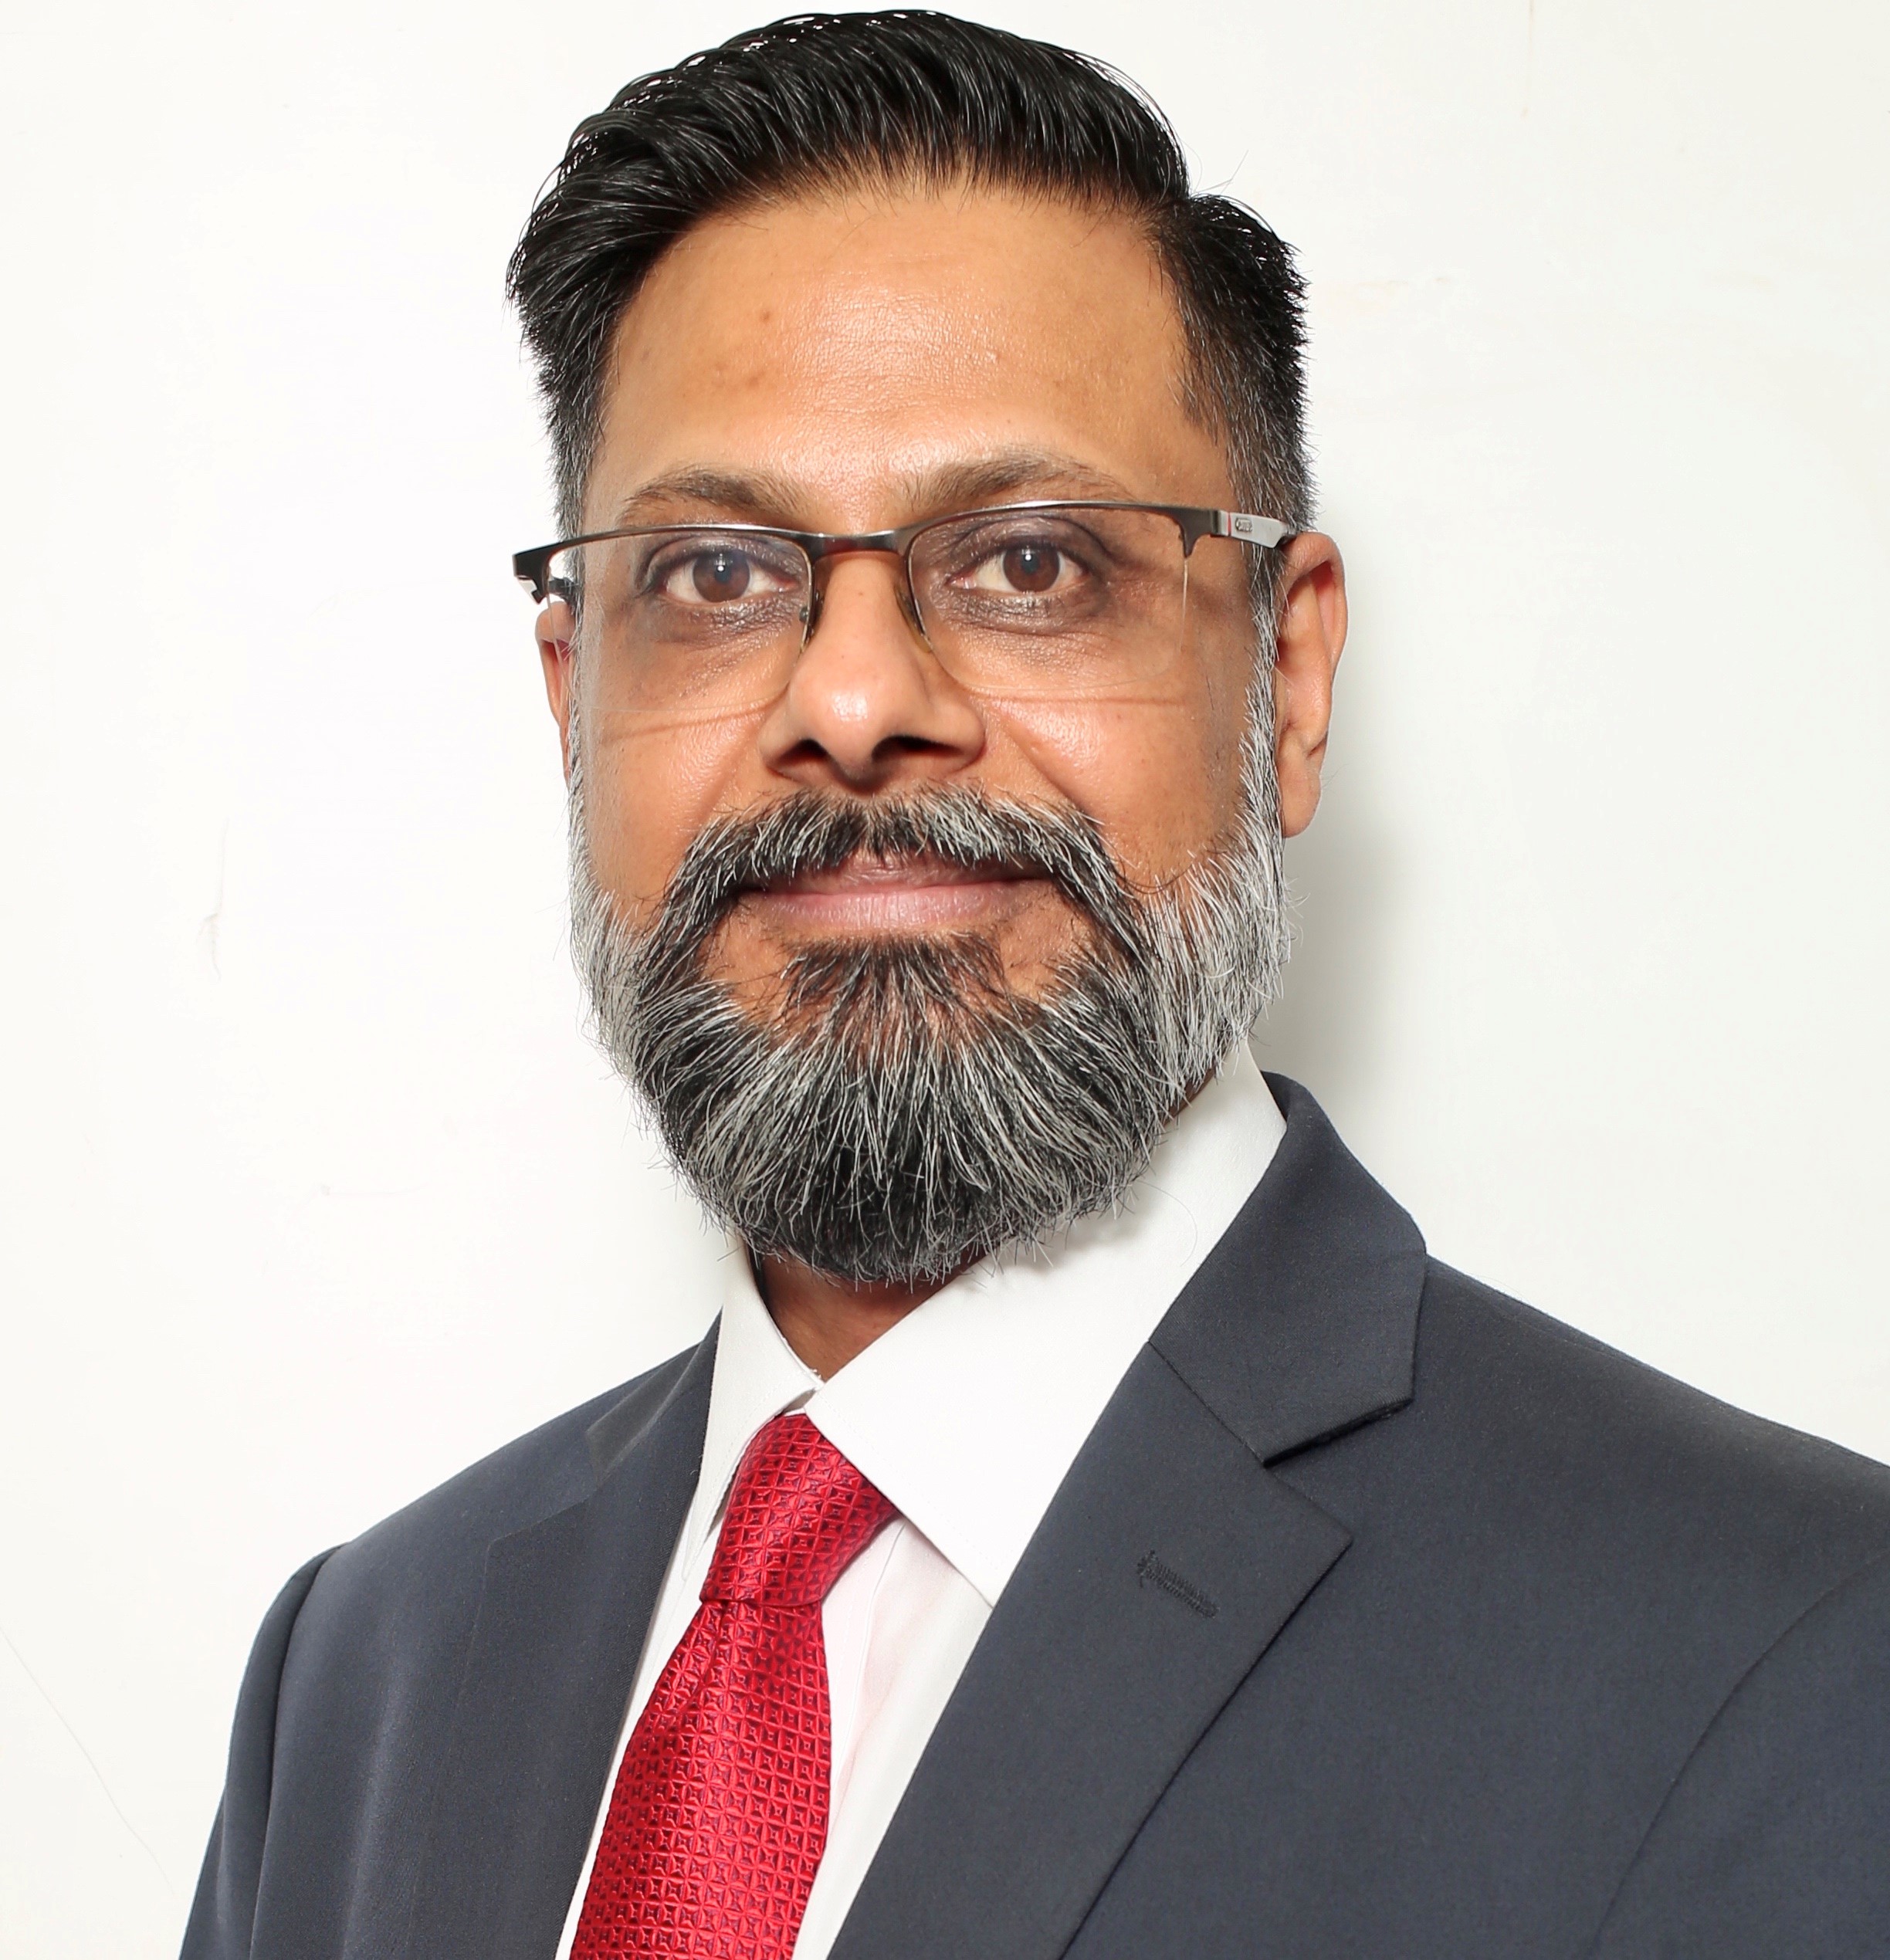 Abhilash Misra, <span>CEO, NSE Academy Ltd. (A wholly owned subsidiary of National Stock Exchange Ltd.)</span>